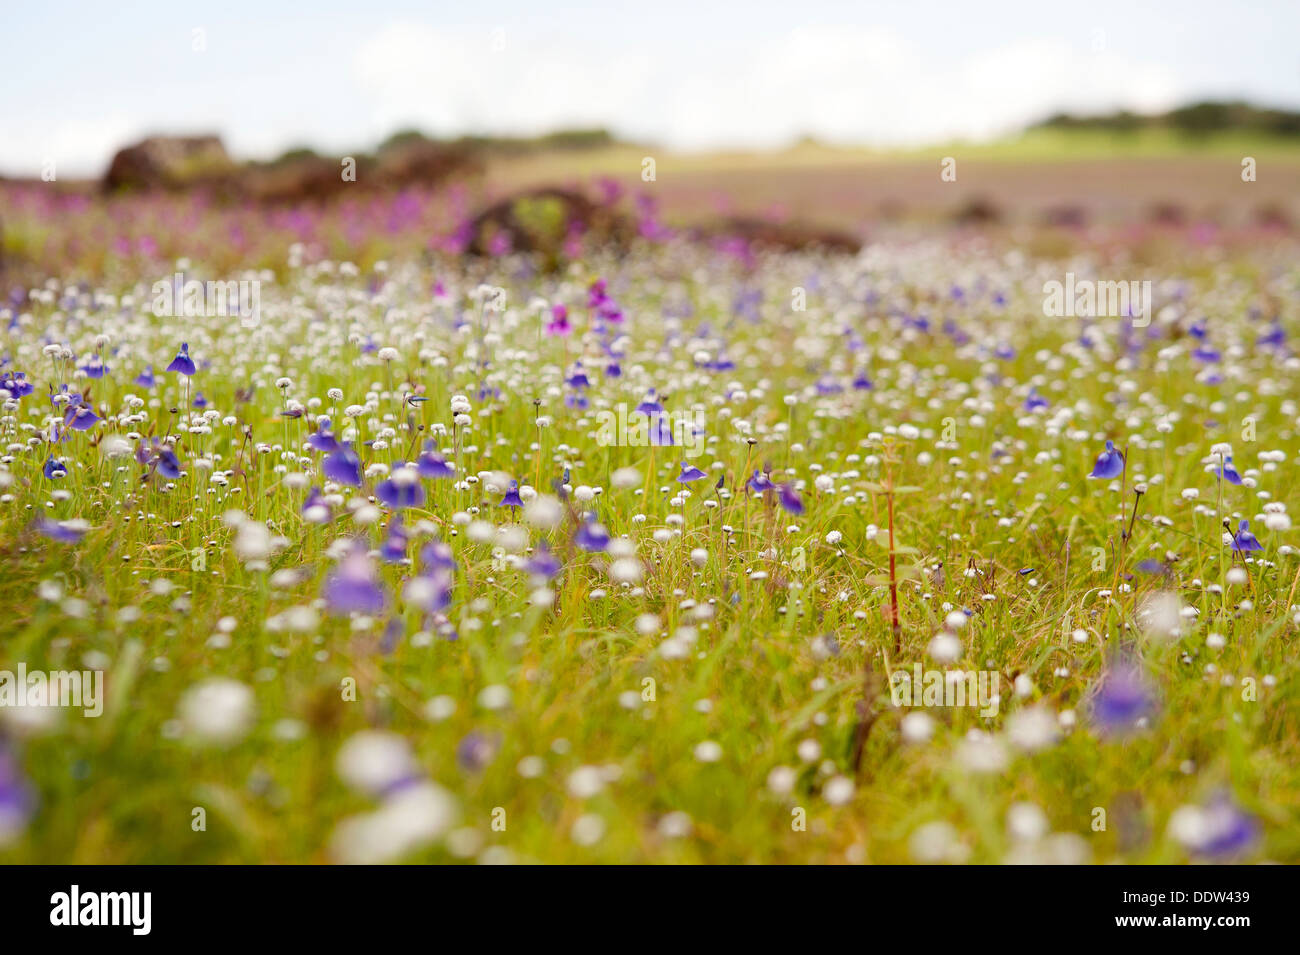 Bed of Flowers at the Scenic Landscape of Kass Plateau, UNESCO approved World Heritage Site Stock Photo